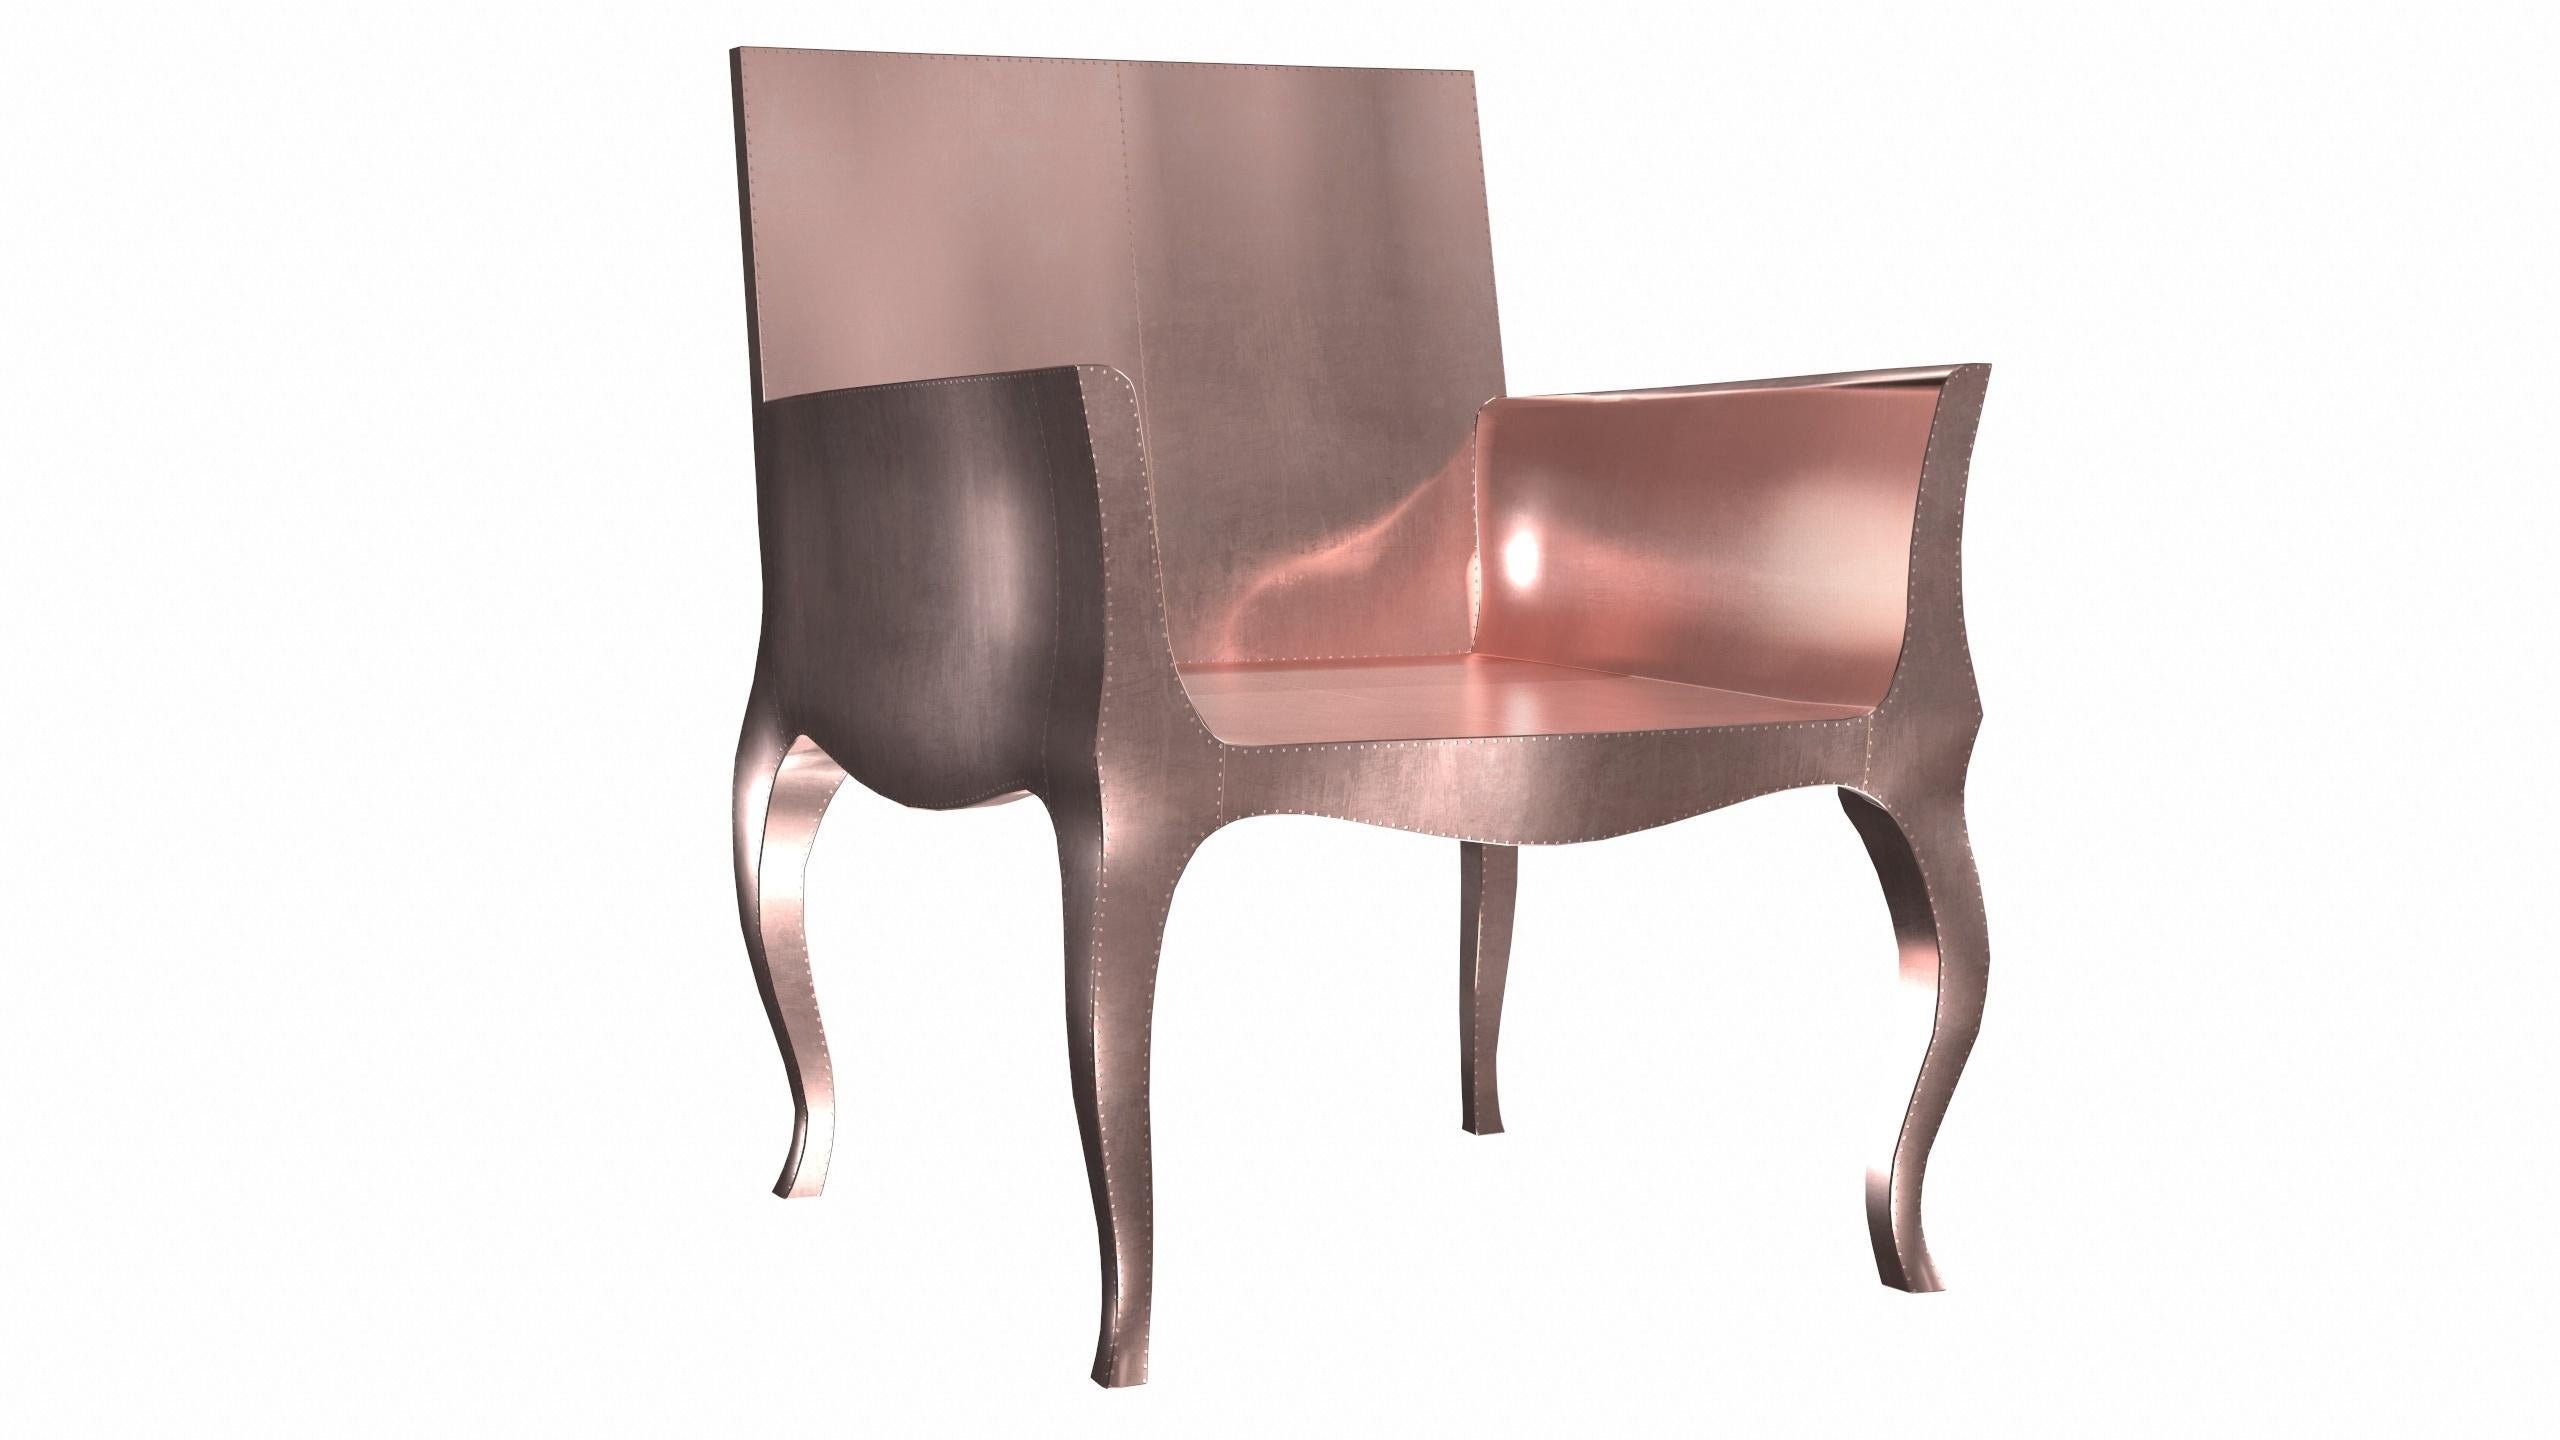 Art Deco Chairs in Smooth Copper by Paul Mathieu for S. Odegard In New Condition For Sale In New York, NY